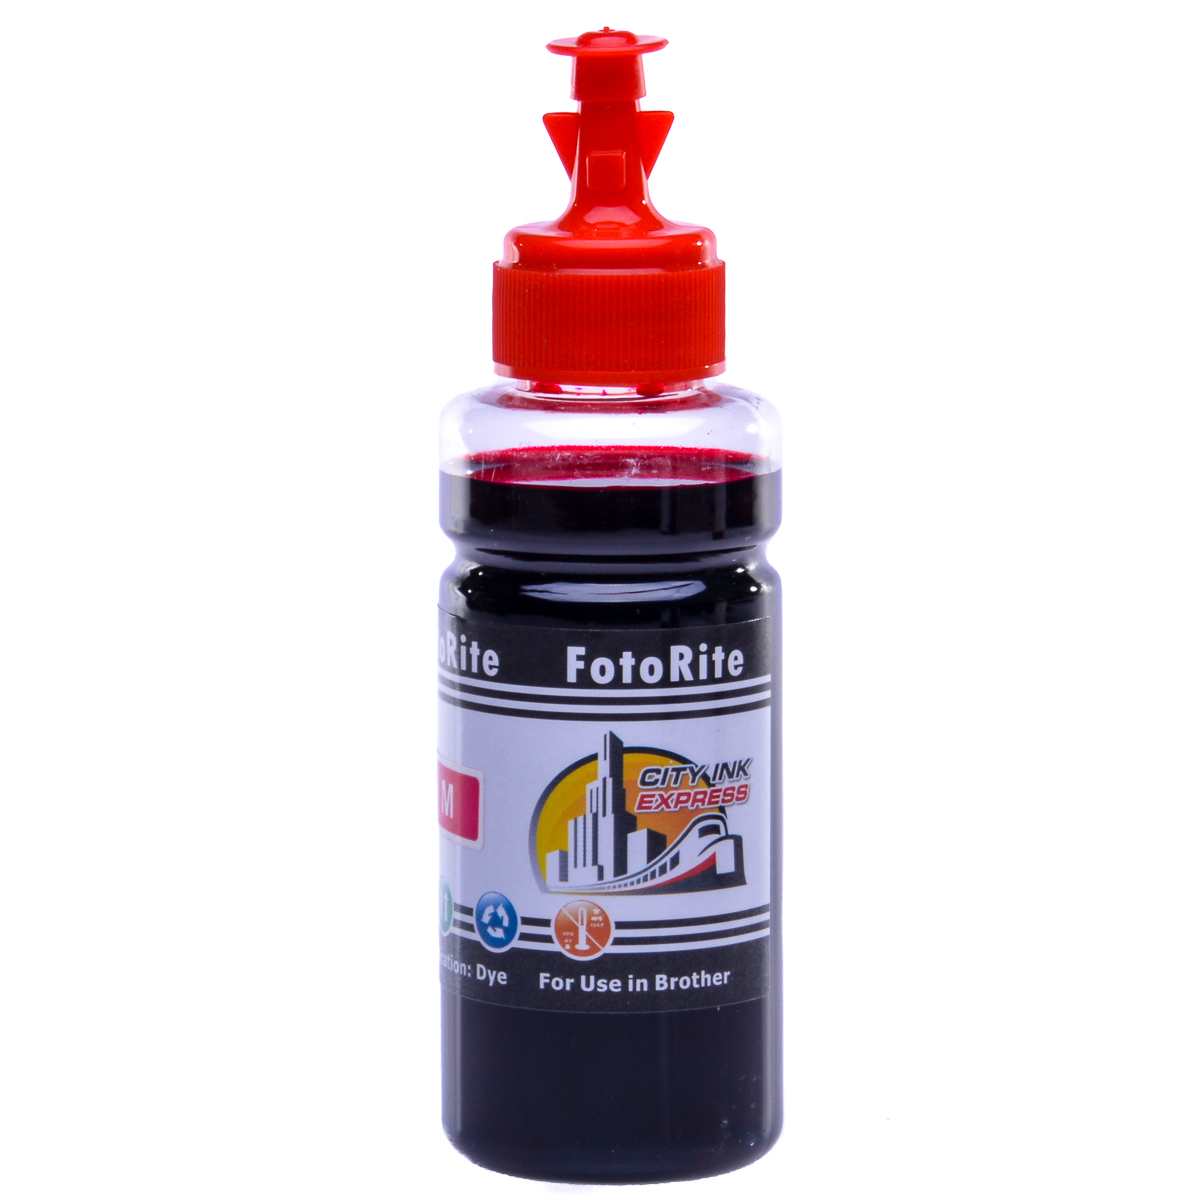 Cheap Magenta dye ink replaces Brother Fax 1355 - LC-1000M